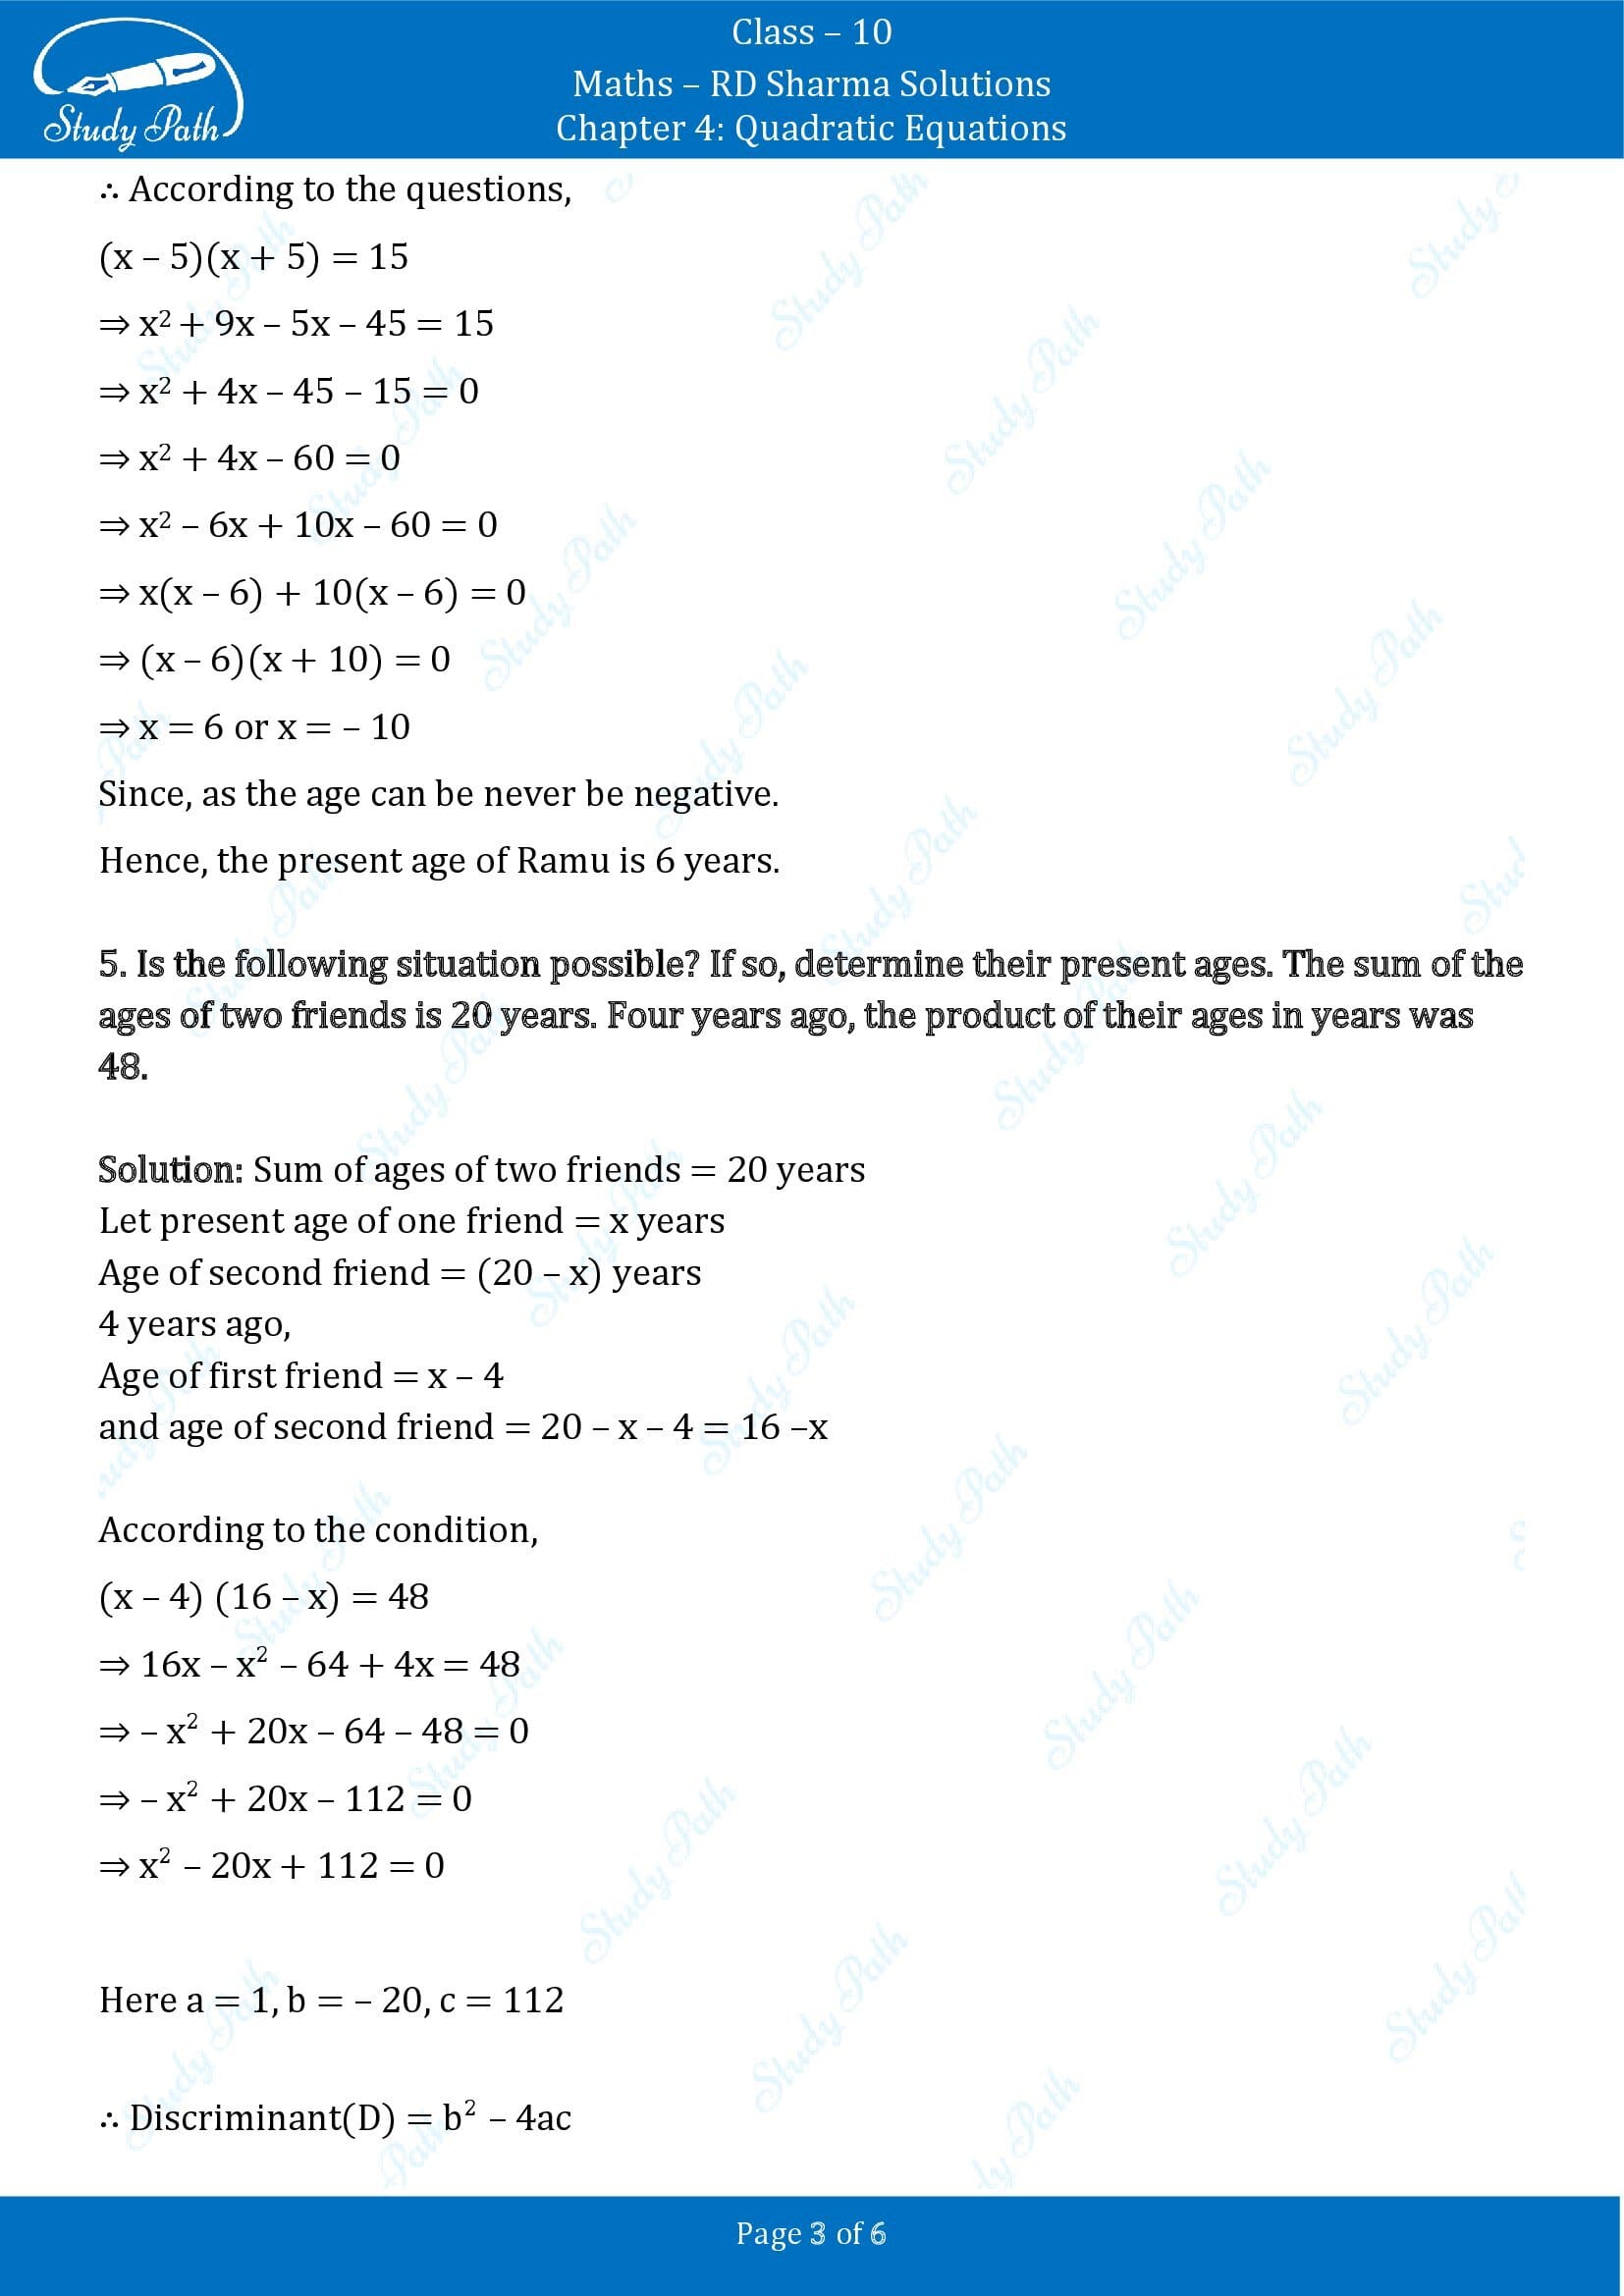 RD Sharma Solutions Class 10 Chapter 4 Quadratic Equations Exercise 4.9 00003